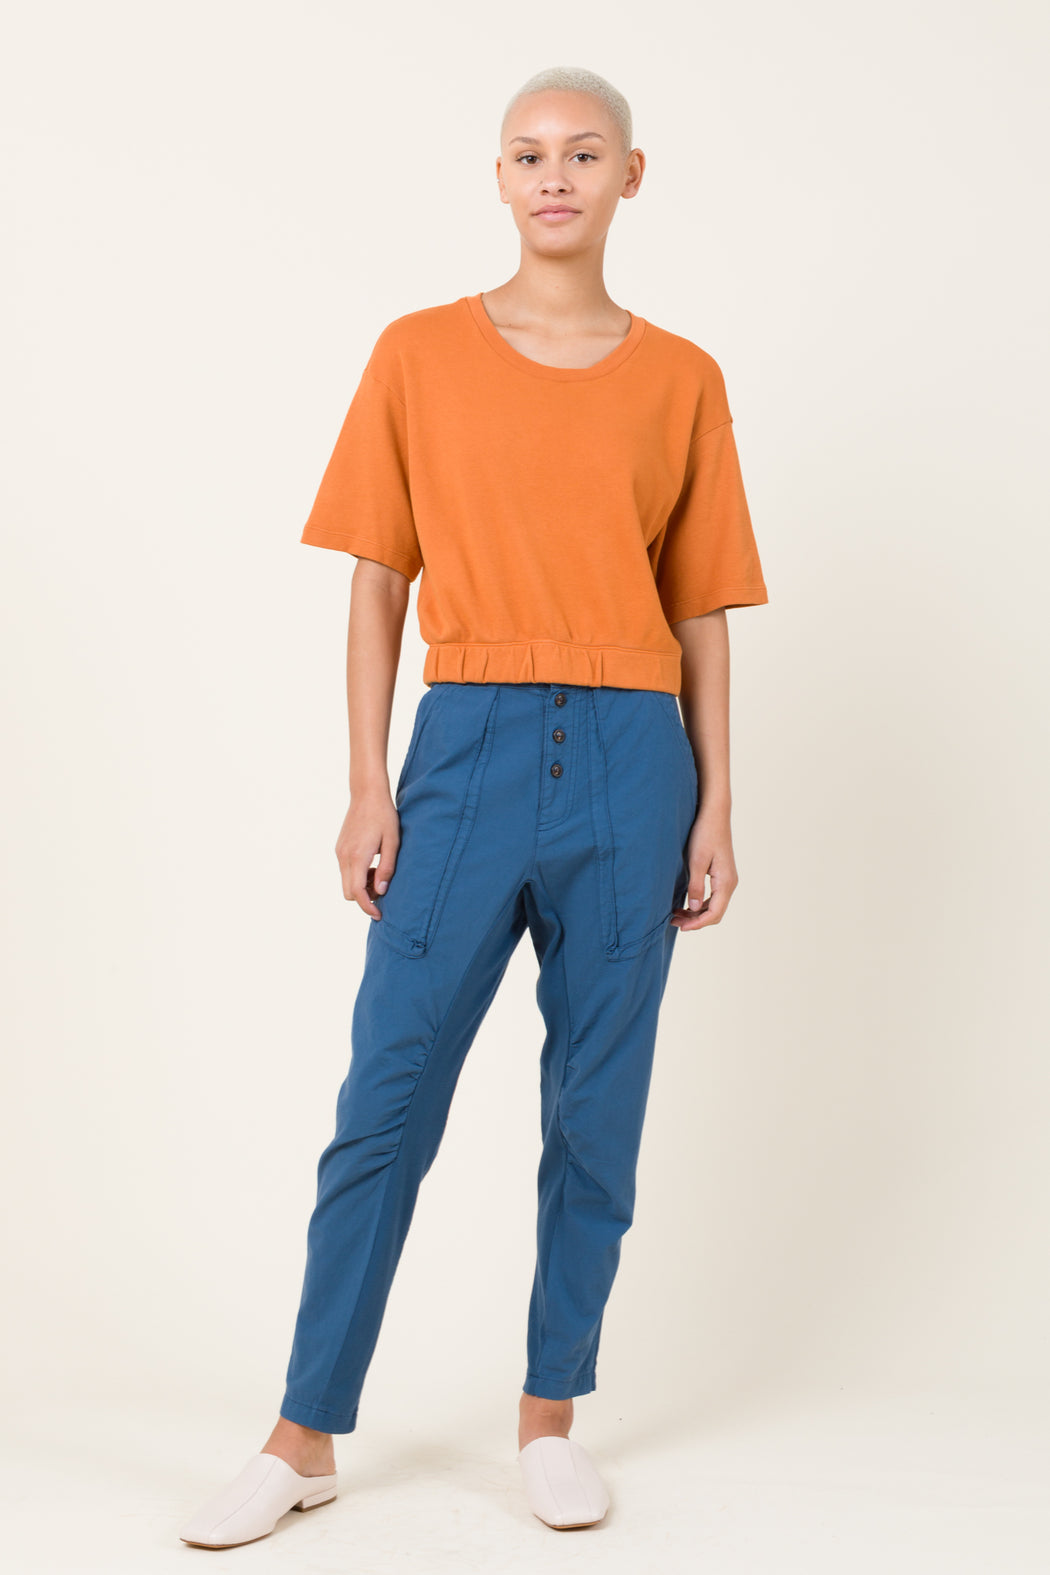 An incredibly soft, relaxed, lightweight pant with an organic cotton muslin body has an organic cotton knit inset at the inseam for style and comfort. A mid-rise, exposed button fly pant with deep gusseted front pockets, back patch pockets and belt loops.The softened cotton will loosen with wear, the initial fit should be snug.